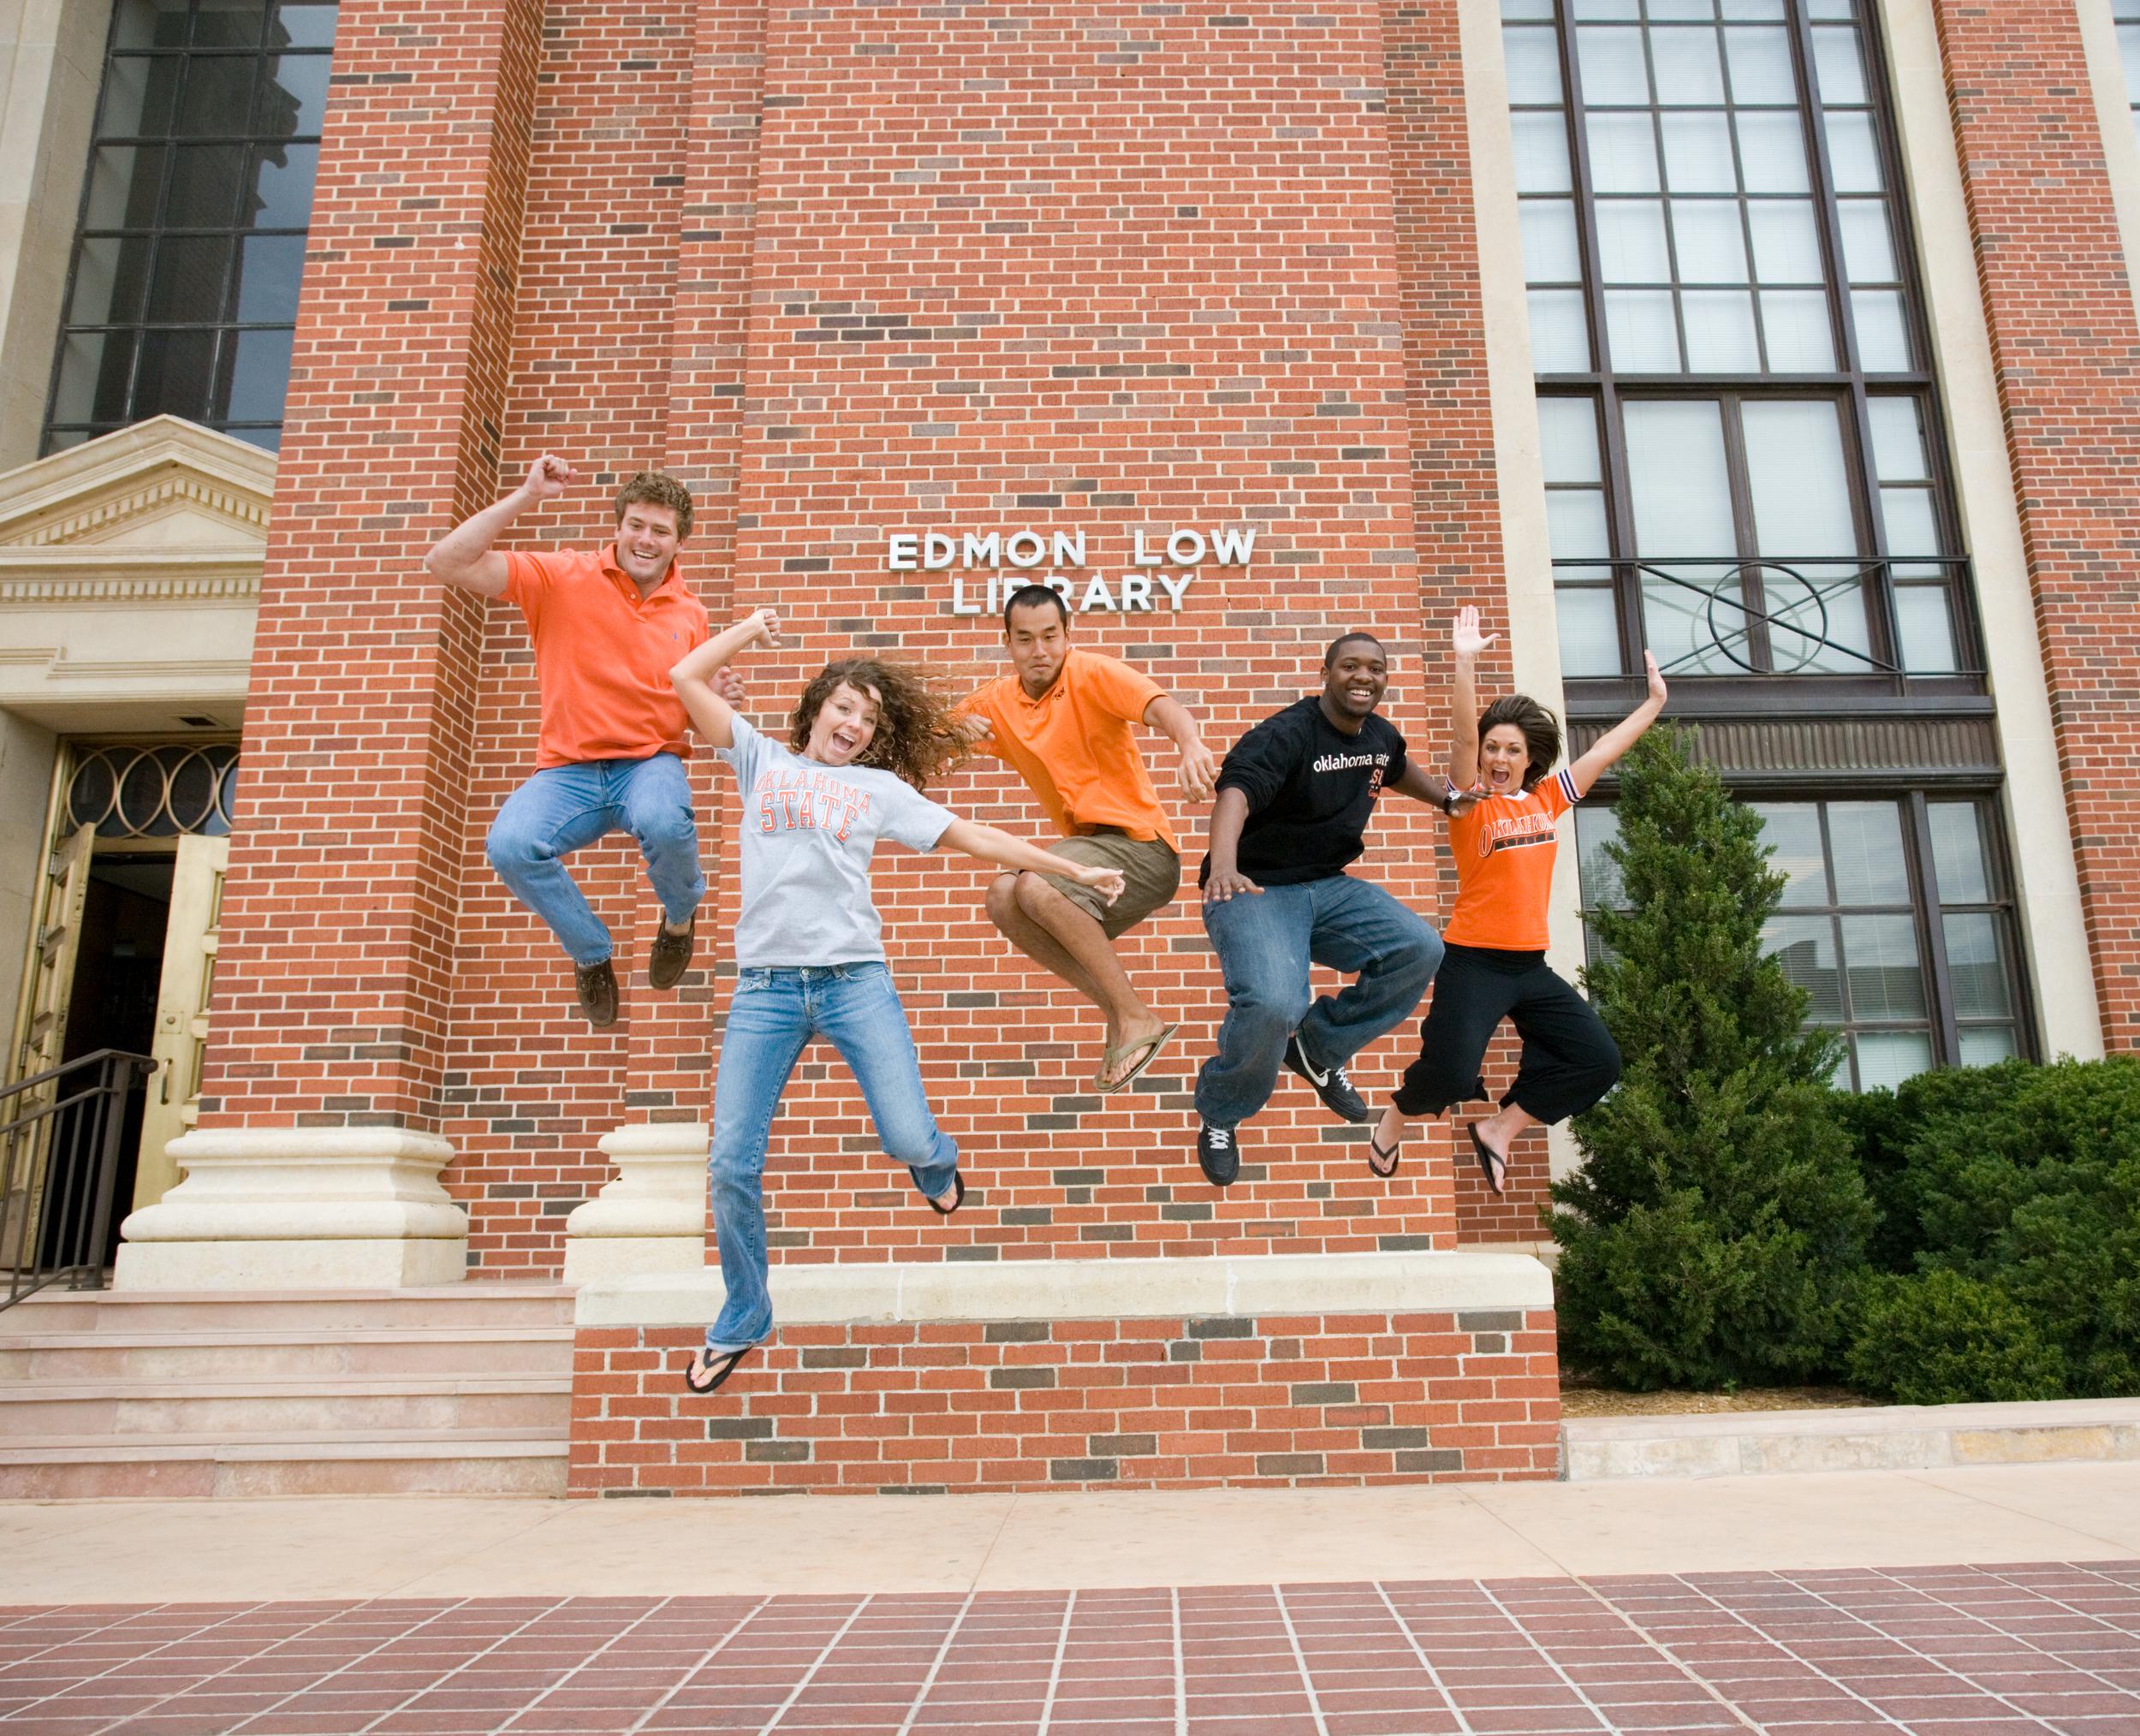 Five OSU students jumping up in the air in front of the Edmon Low Library